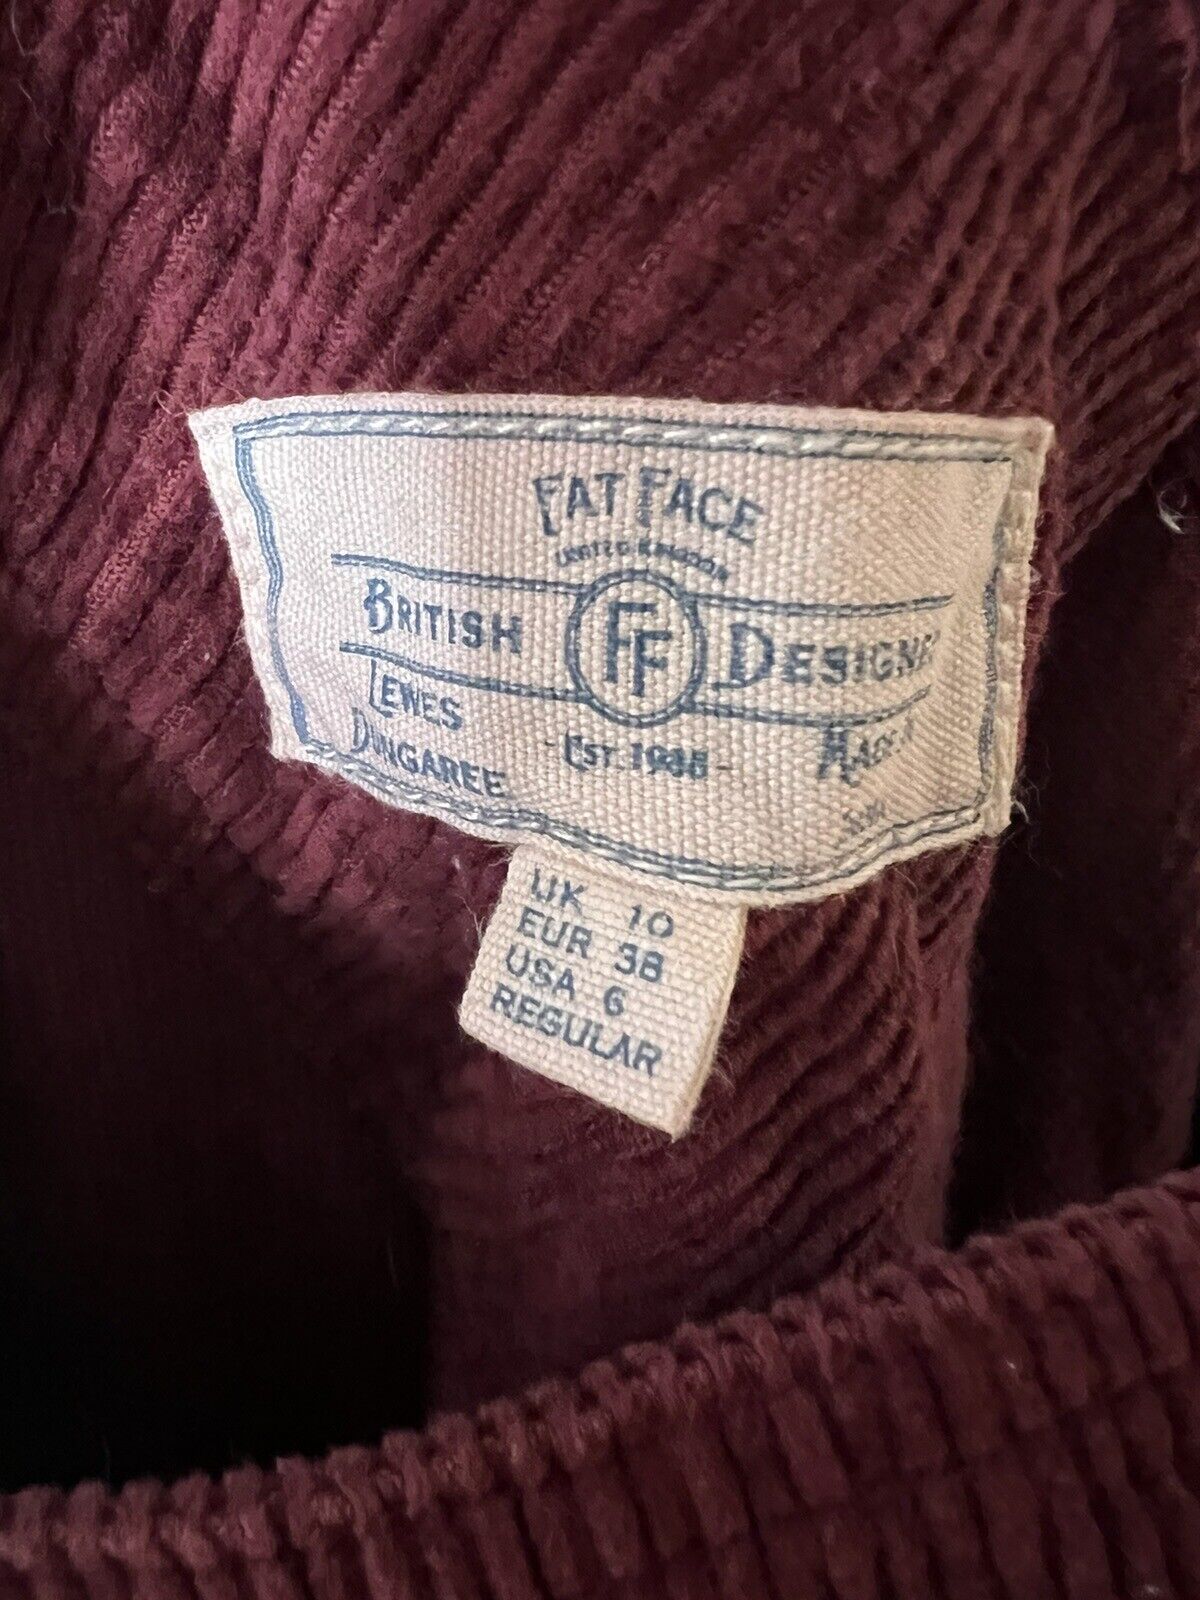 Fat Face Cord Burgundy Dungarees Size 10 | eBay